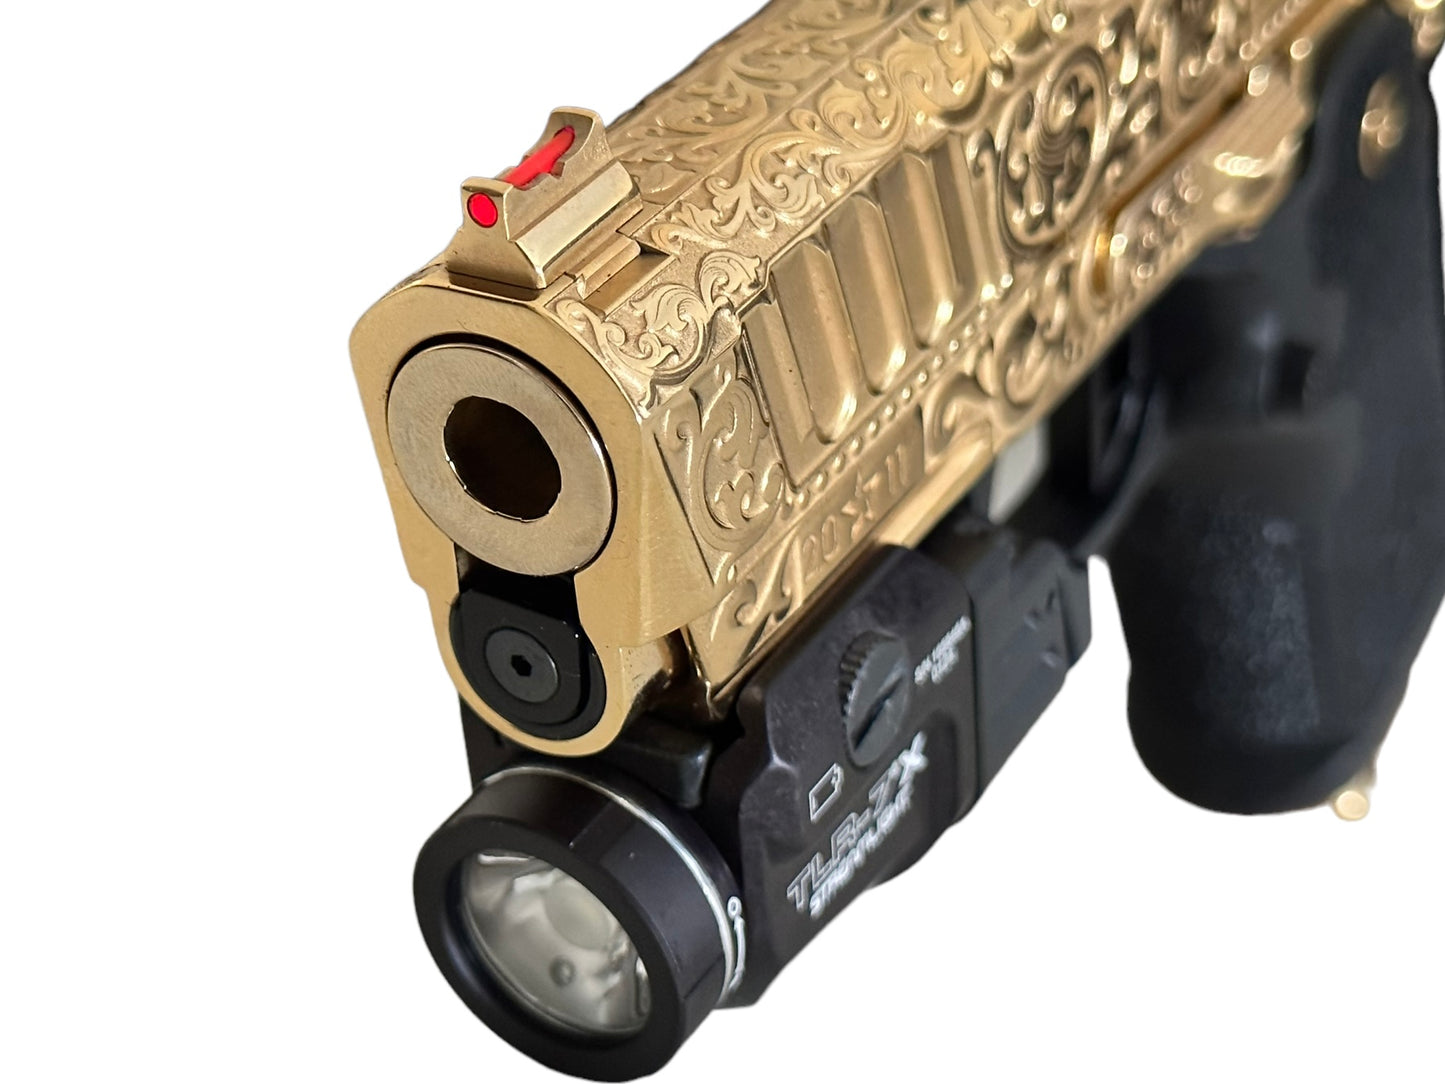 STACCATO CS 9mm FULLY ENGRAVED HIGH POLISHED AND 24k GOLD PLATED 1 OF 1